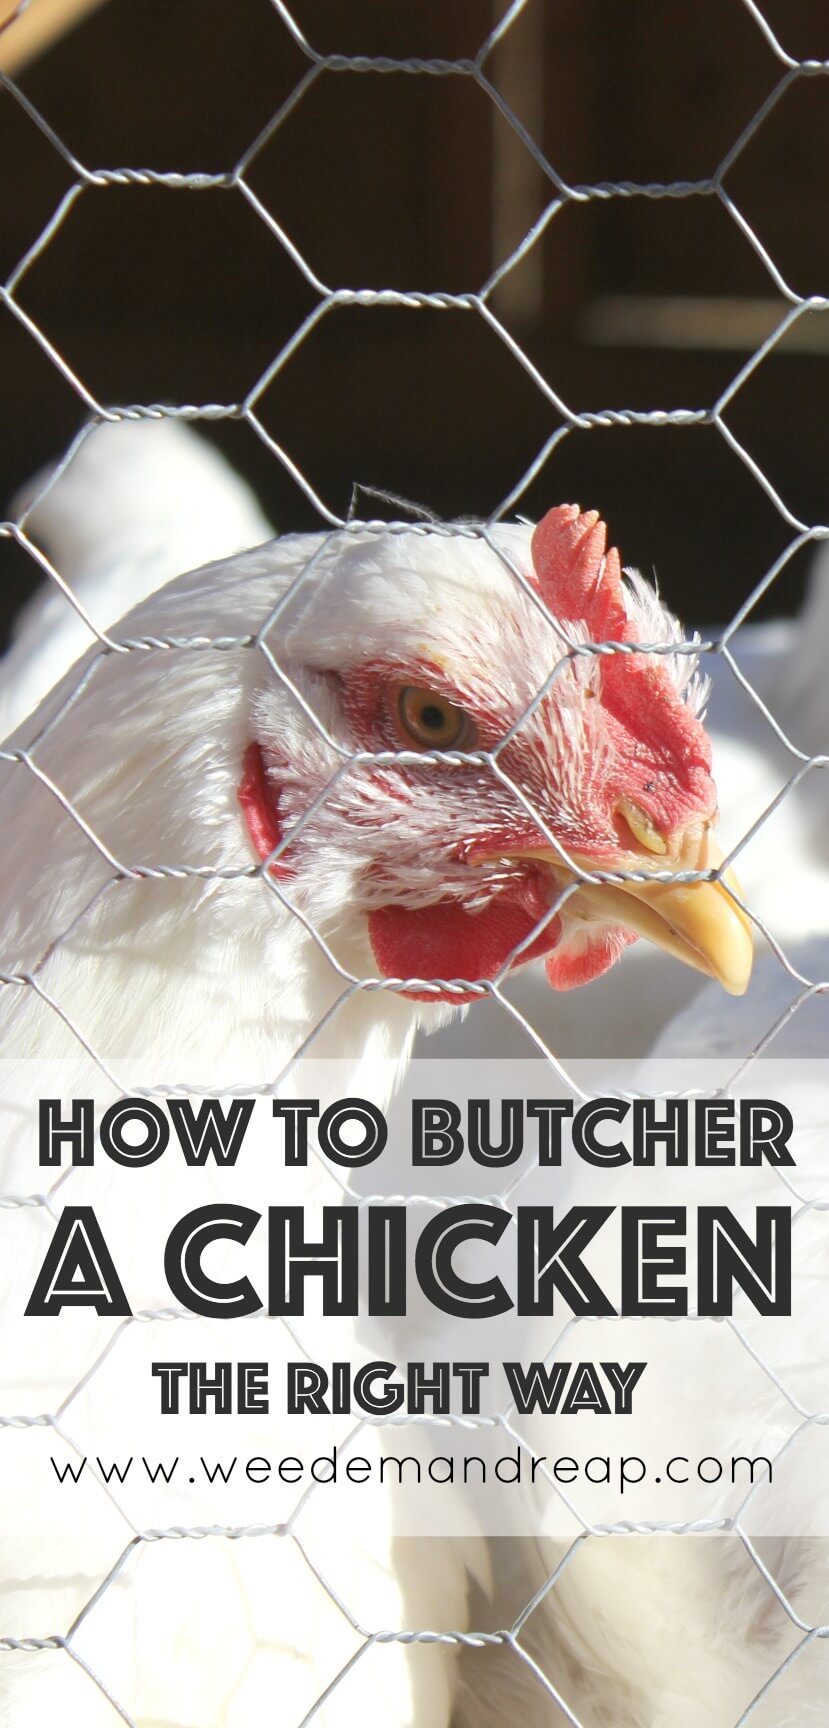 How to Butcher a Chicken (The Right Way)